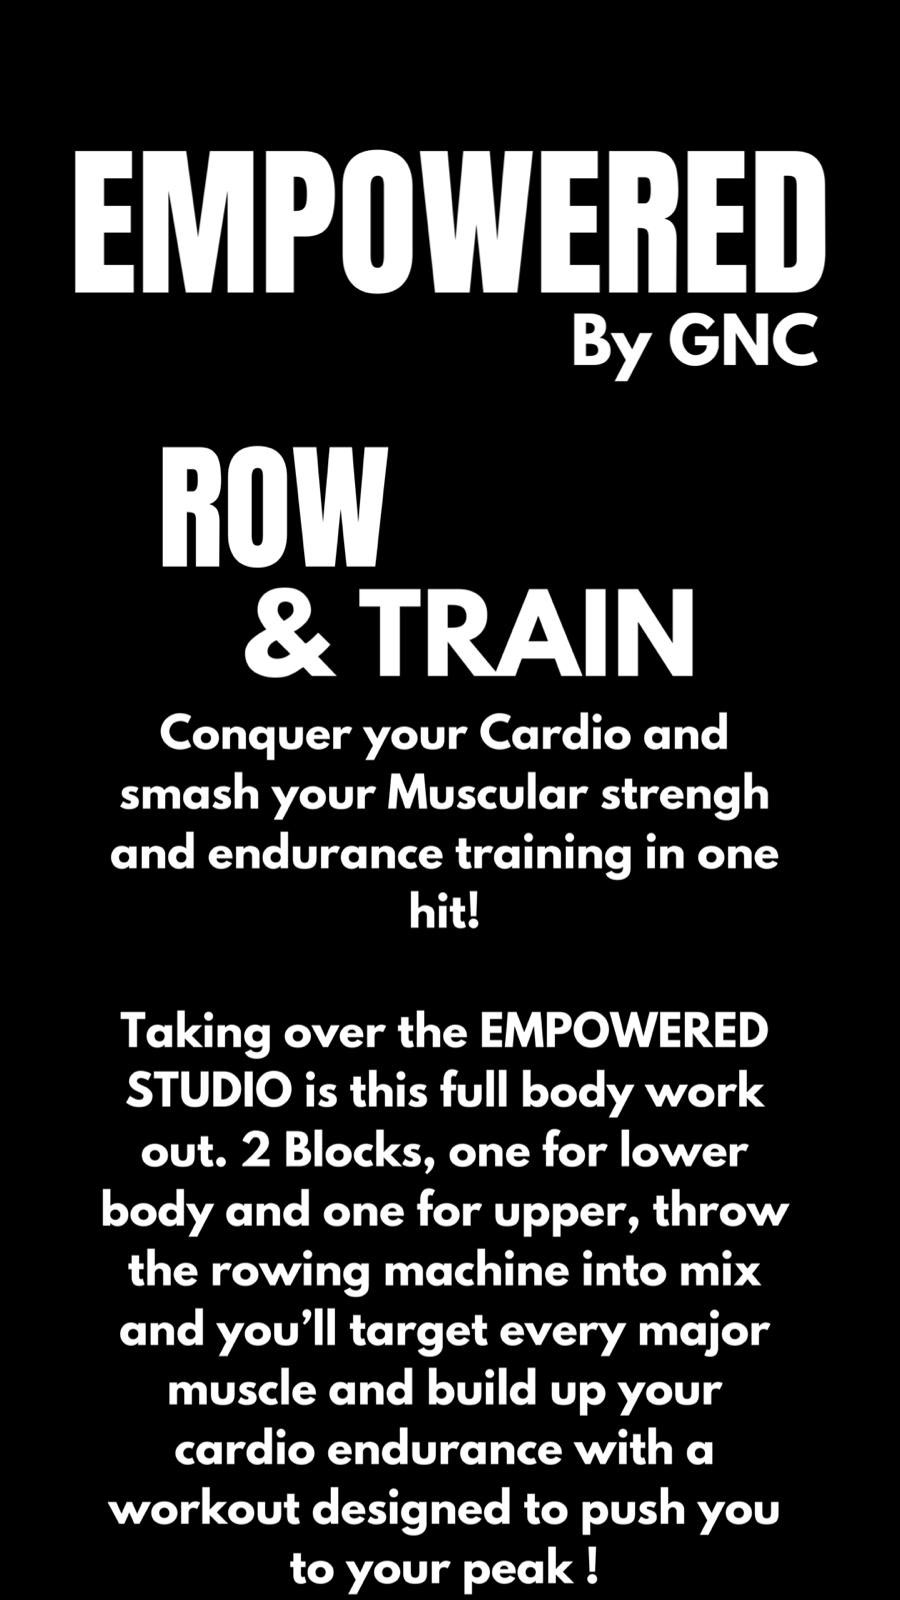 Empowered Row and Train by GNC